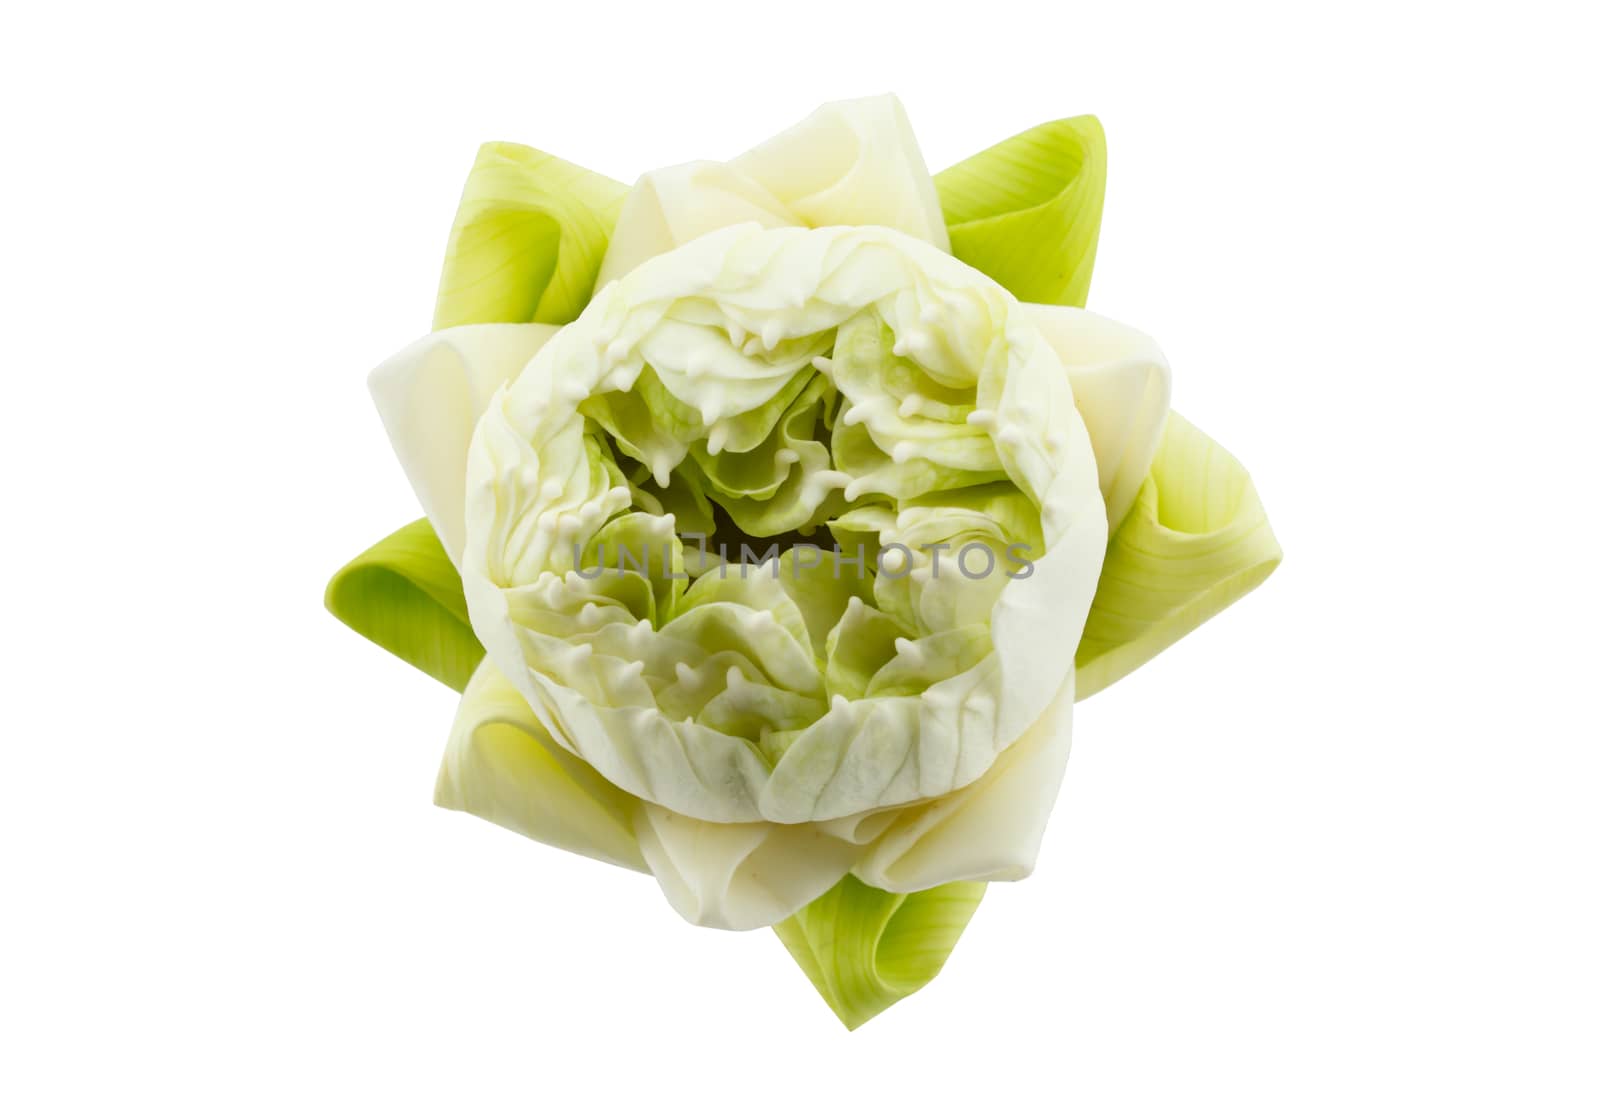 green lotus flower on white background by vitawin